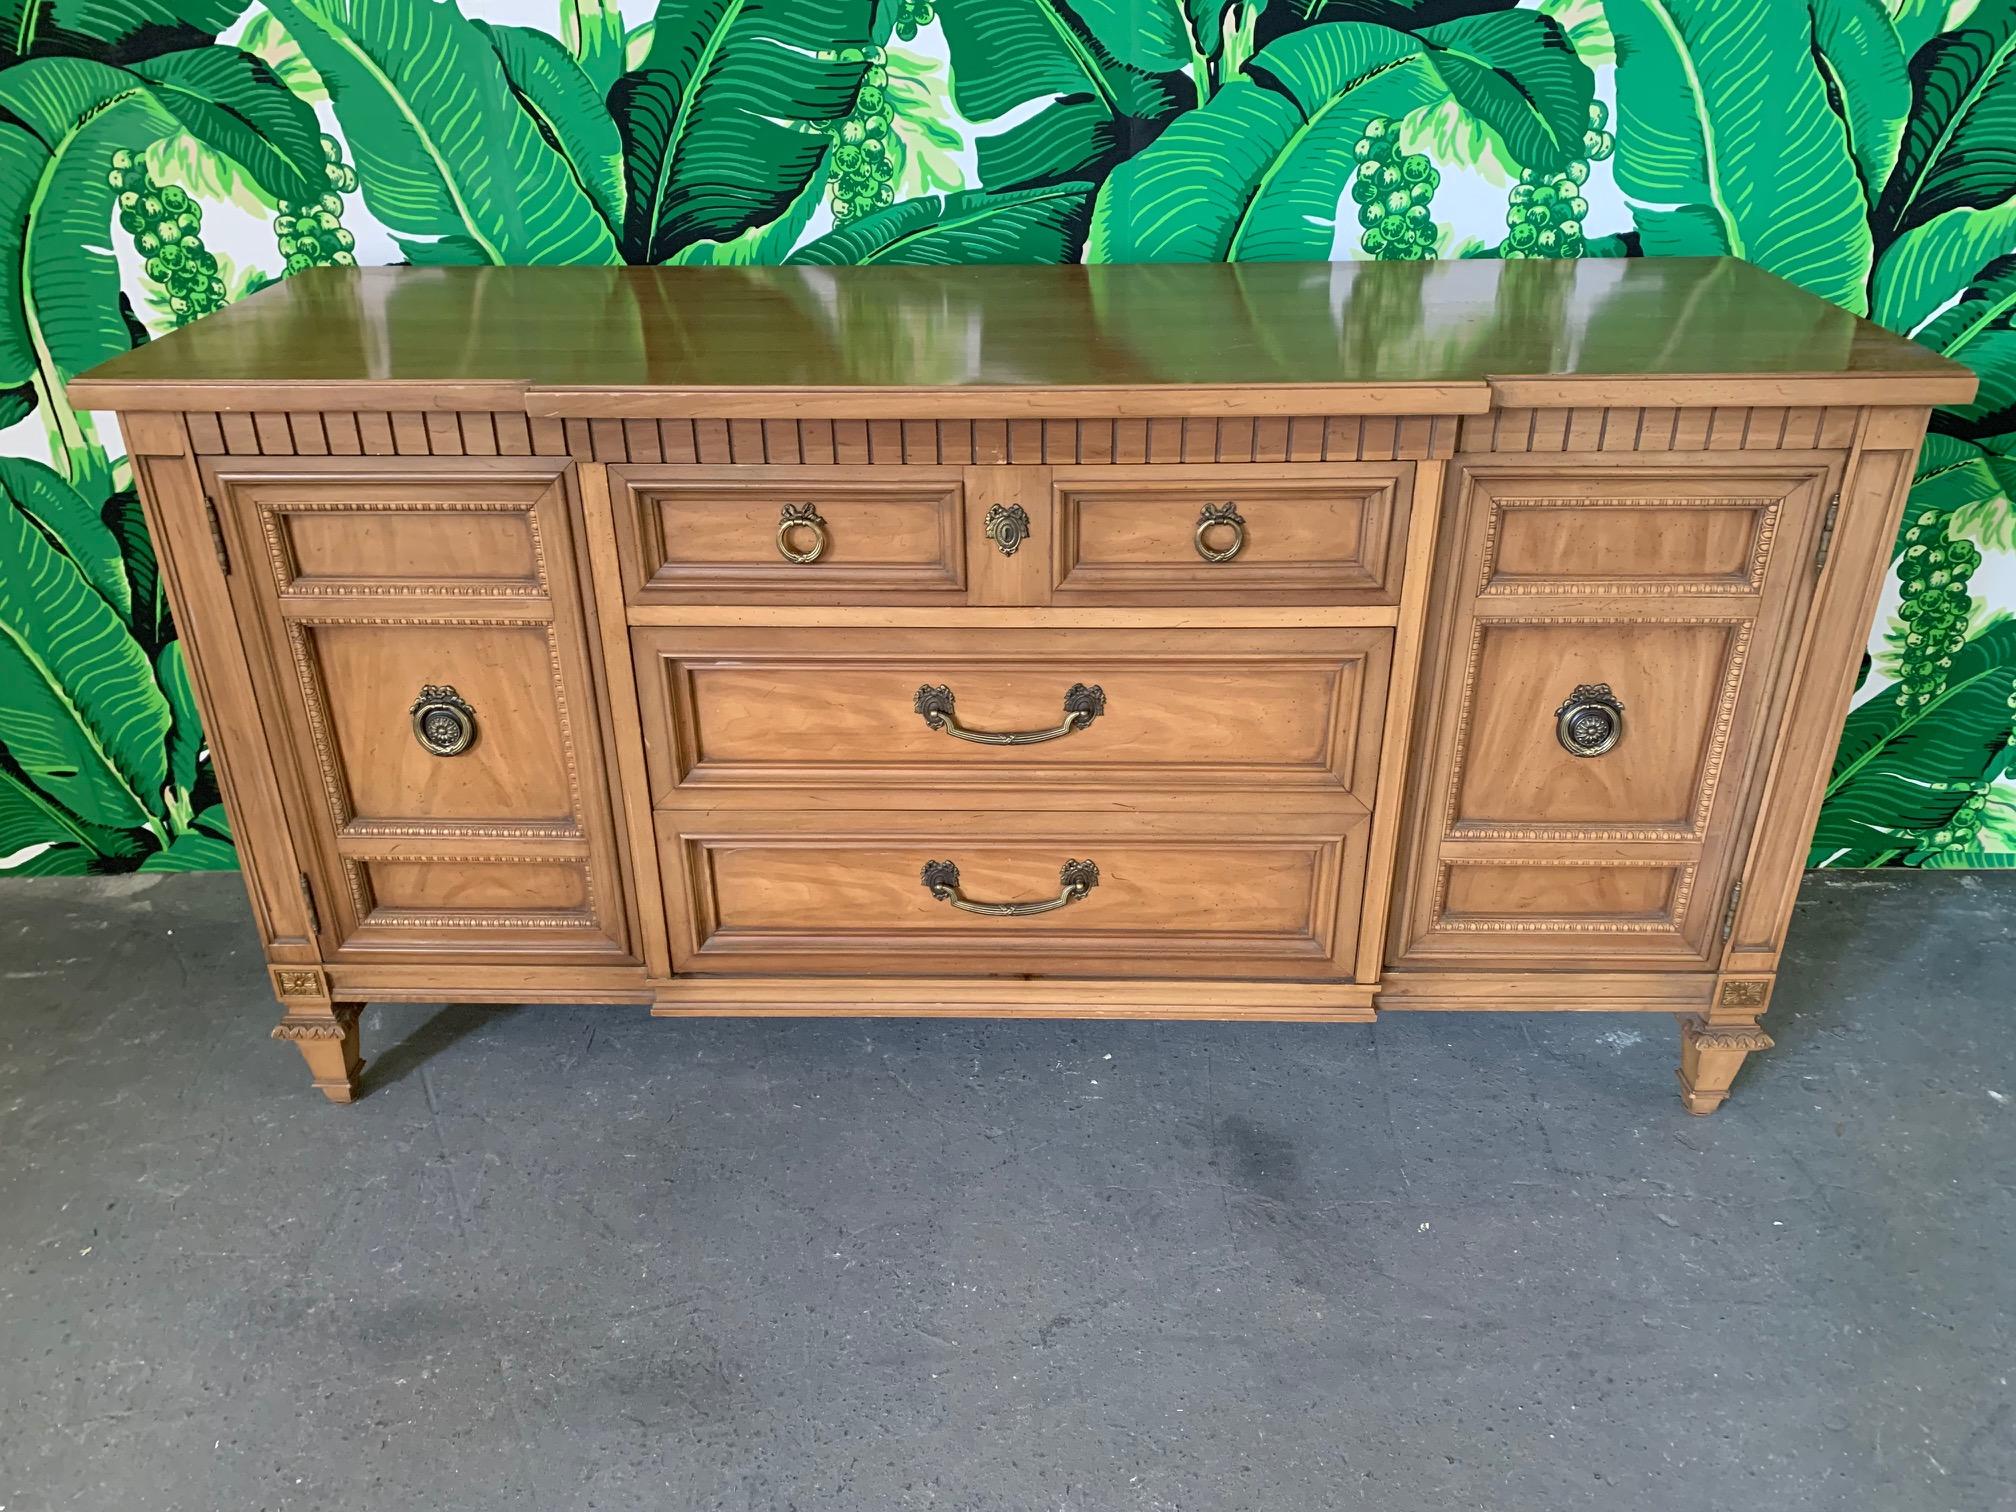 Vintage breakfront server/sideboard features carved detailing and lined stemware drawer. Good vintage condition with minor imperfections consistent with age.